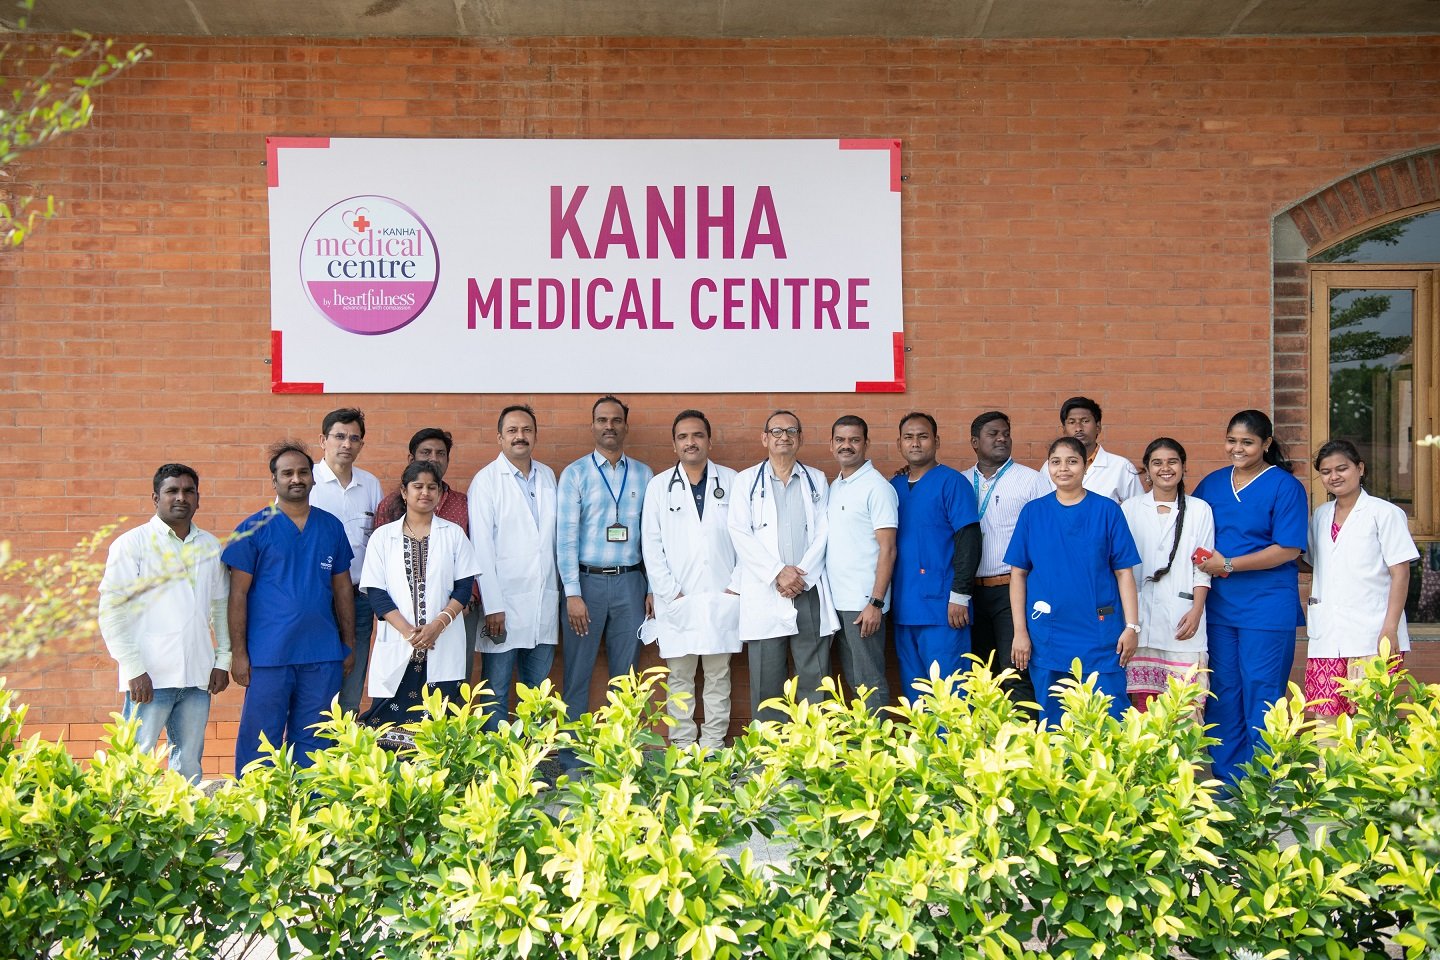 State-of-the-art Kanha Medical Centre Launched at The World’s Largest Meditation Centre